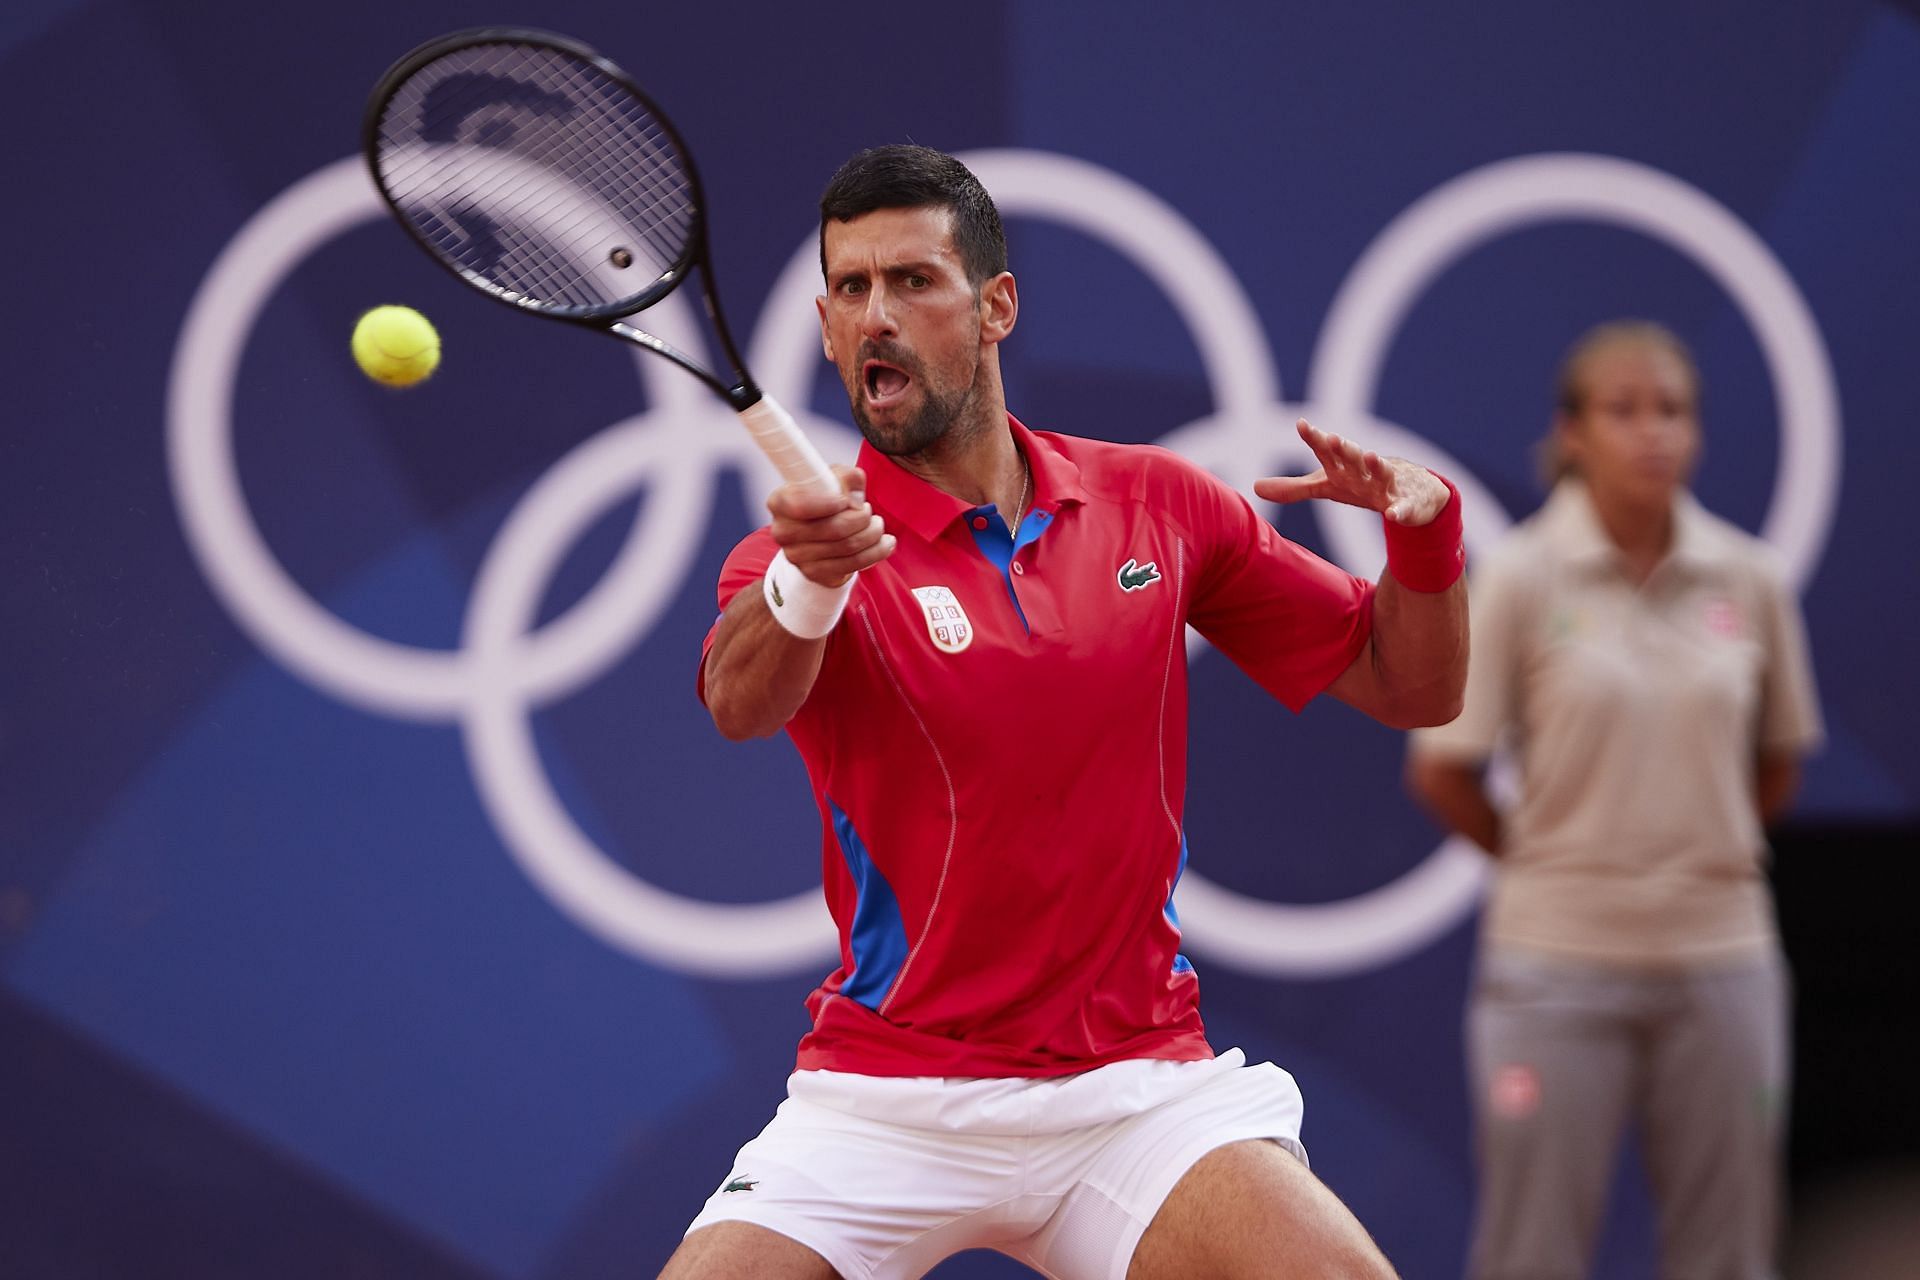 WATCH: Novak Djokovic entertains fans as they tease him over 'good night' controversy ahead of maiden Olympic gold match vs Carlos Alcaraz in Paris